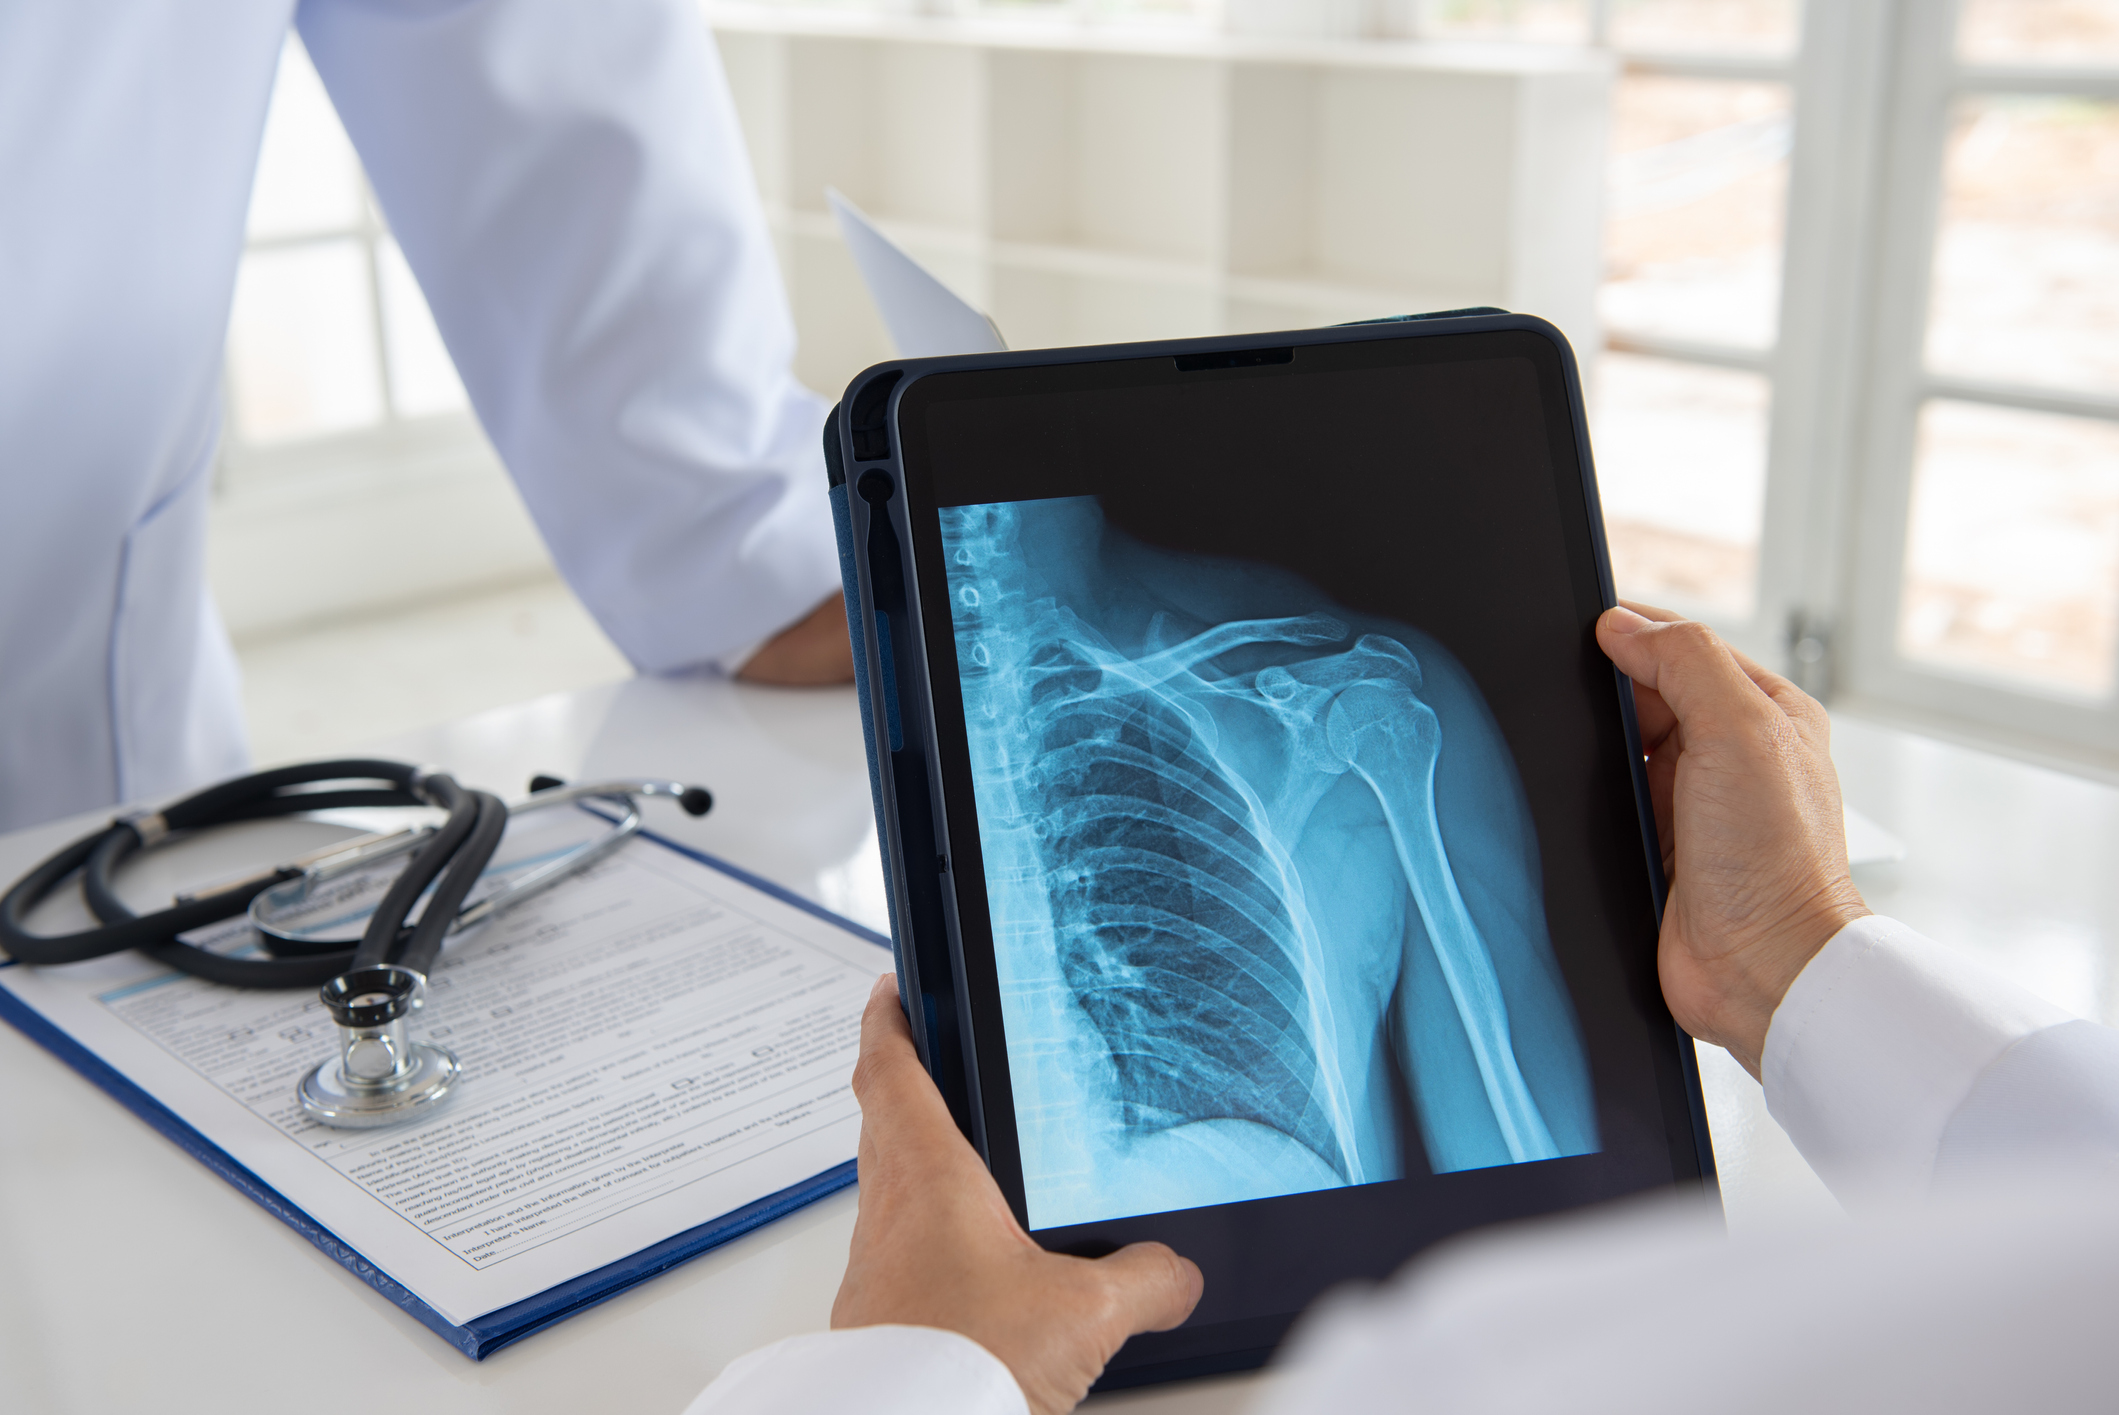 How do I know if I need an X-ray?